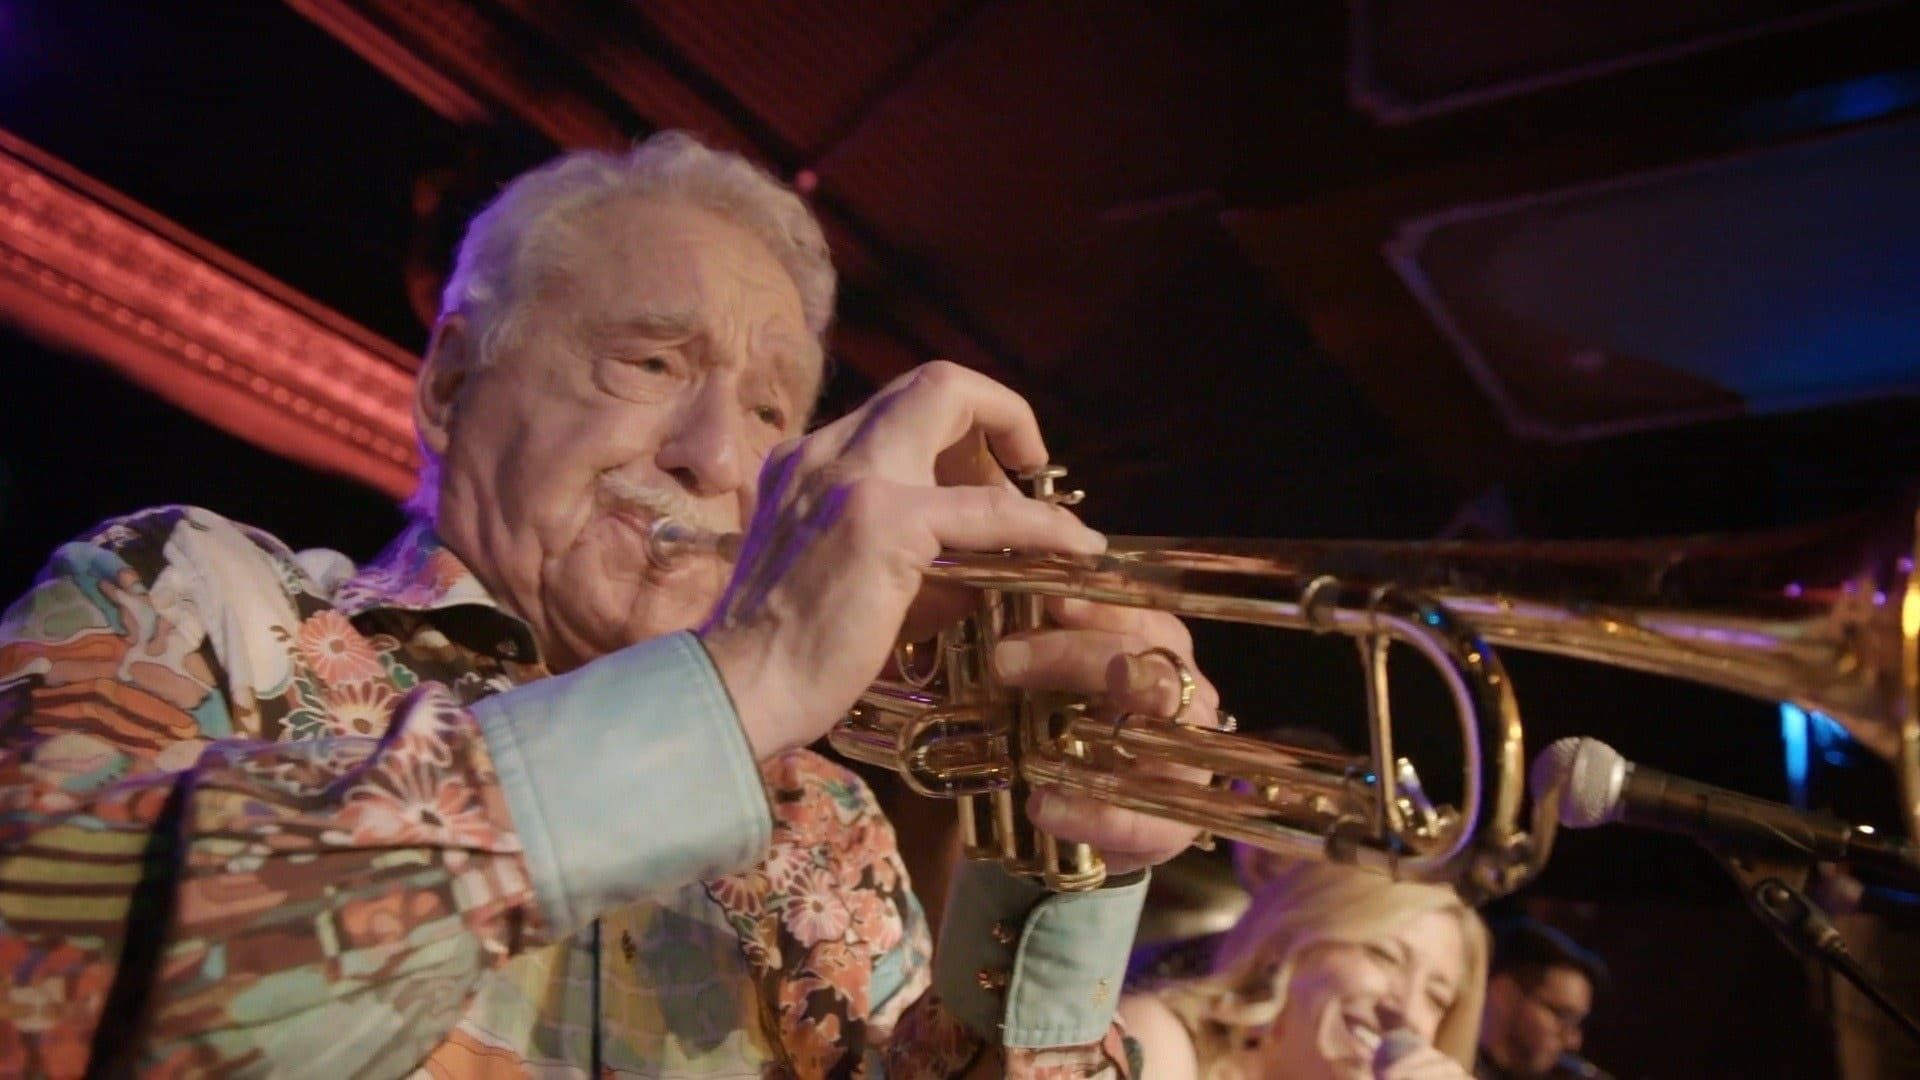 Never Too Late: The Doc Severinsen Story background